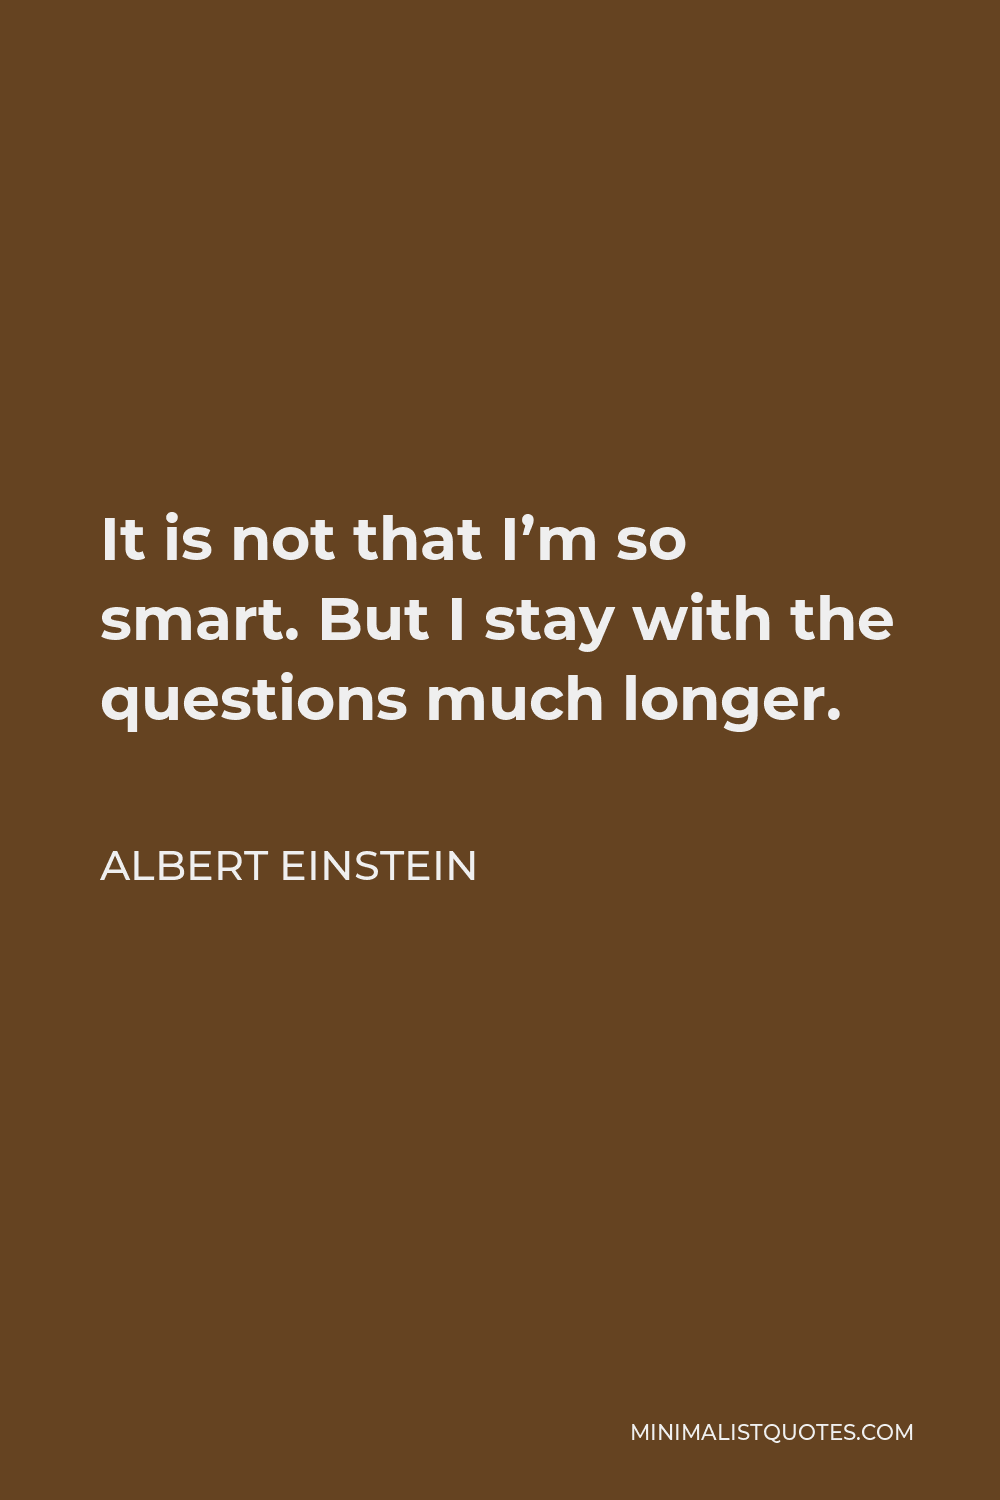 Albert Einstein Quote - It is not that I’m so smart. But I stay with the questions much longer.